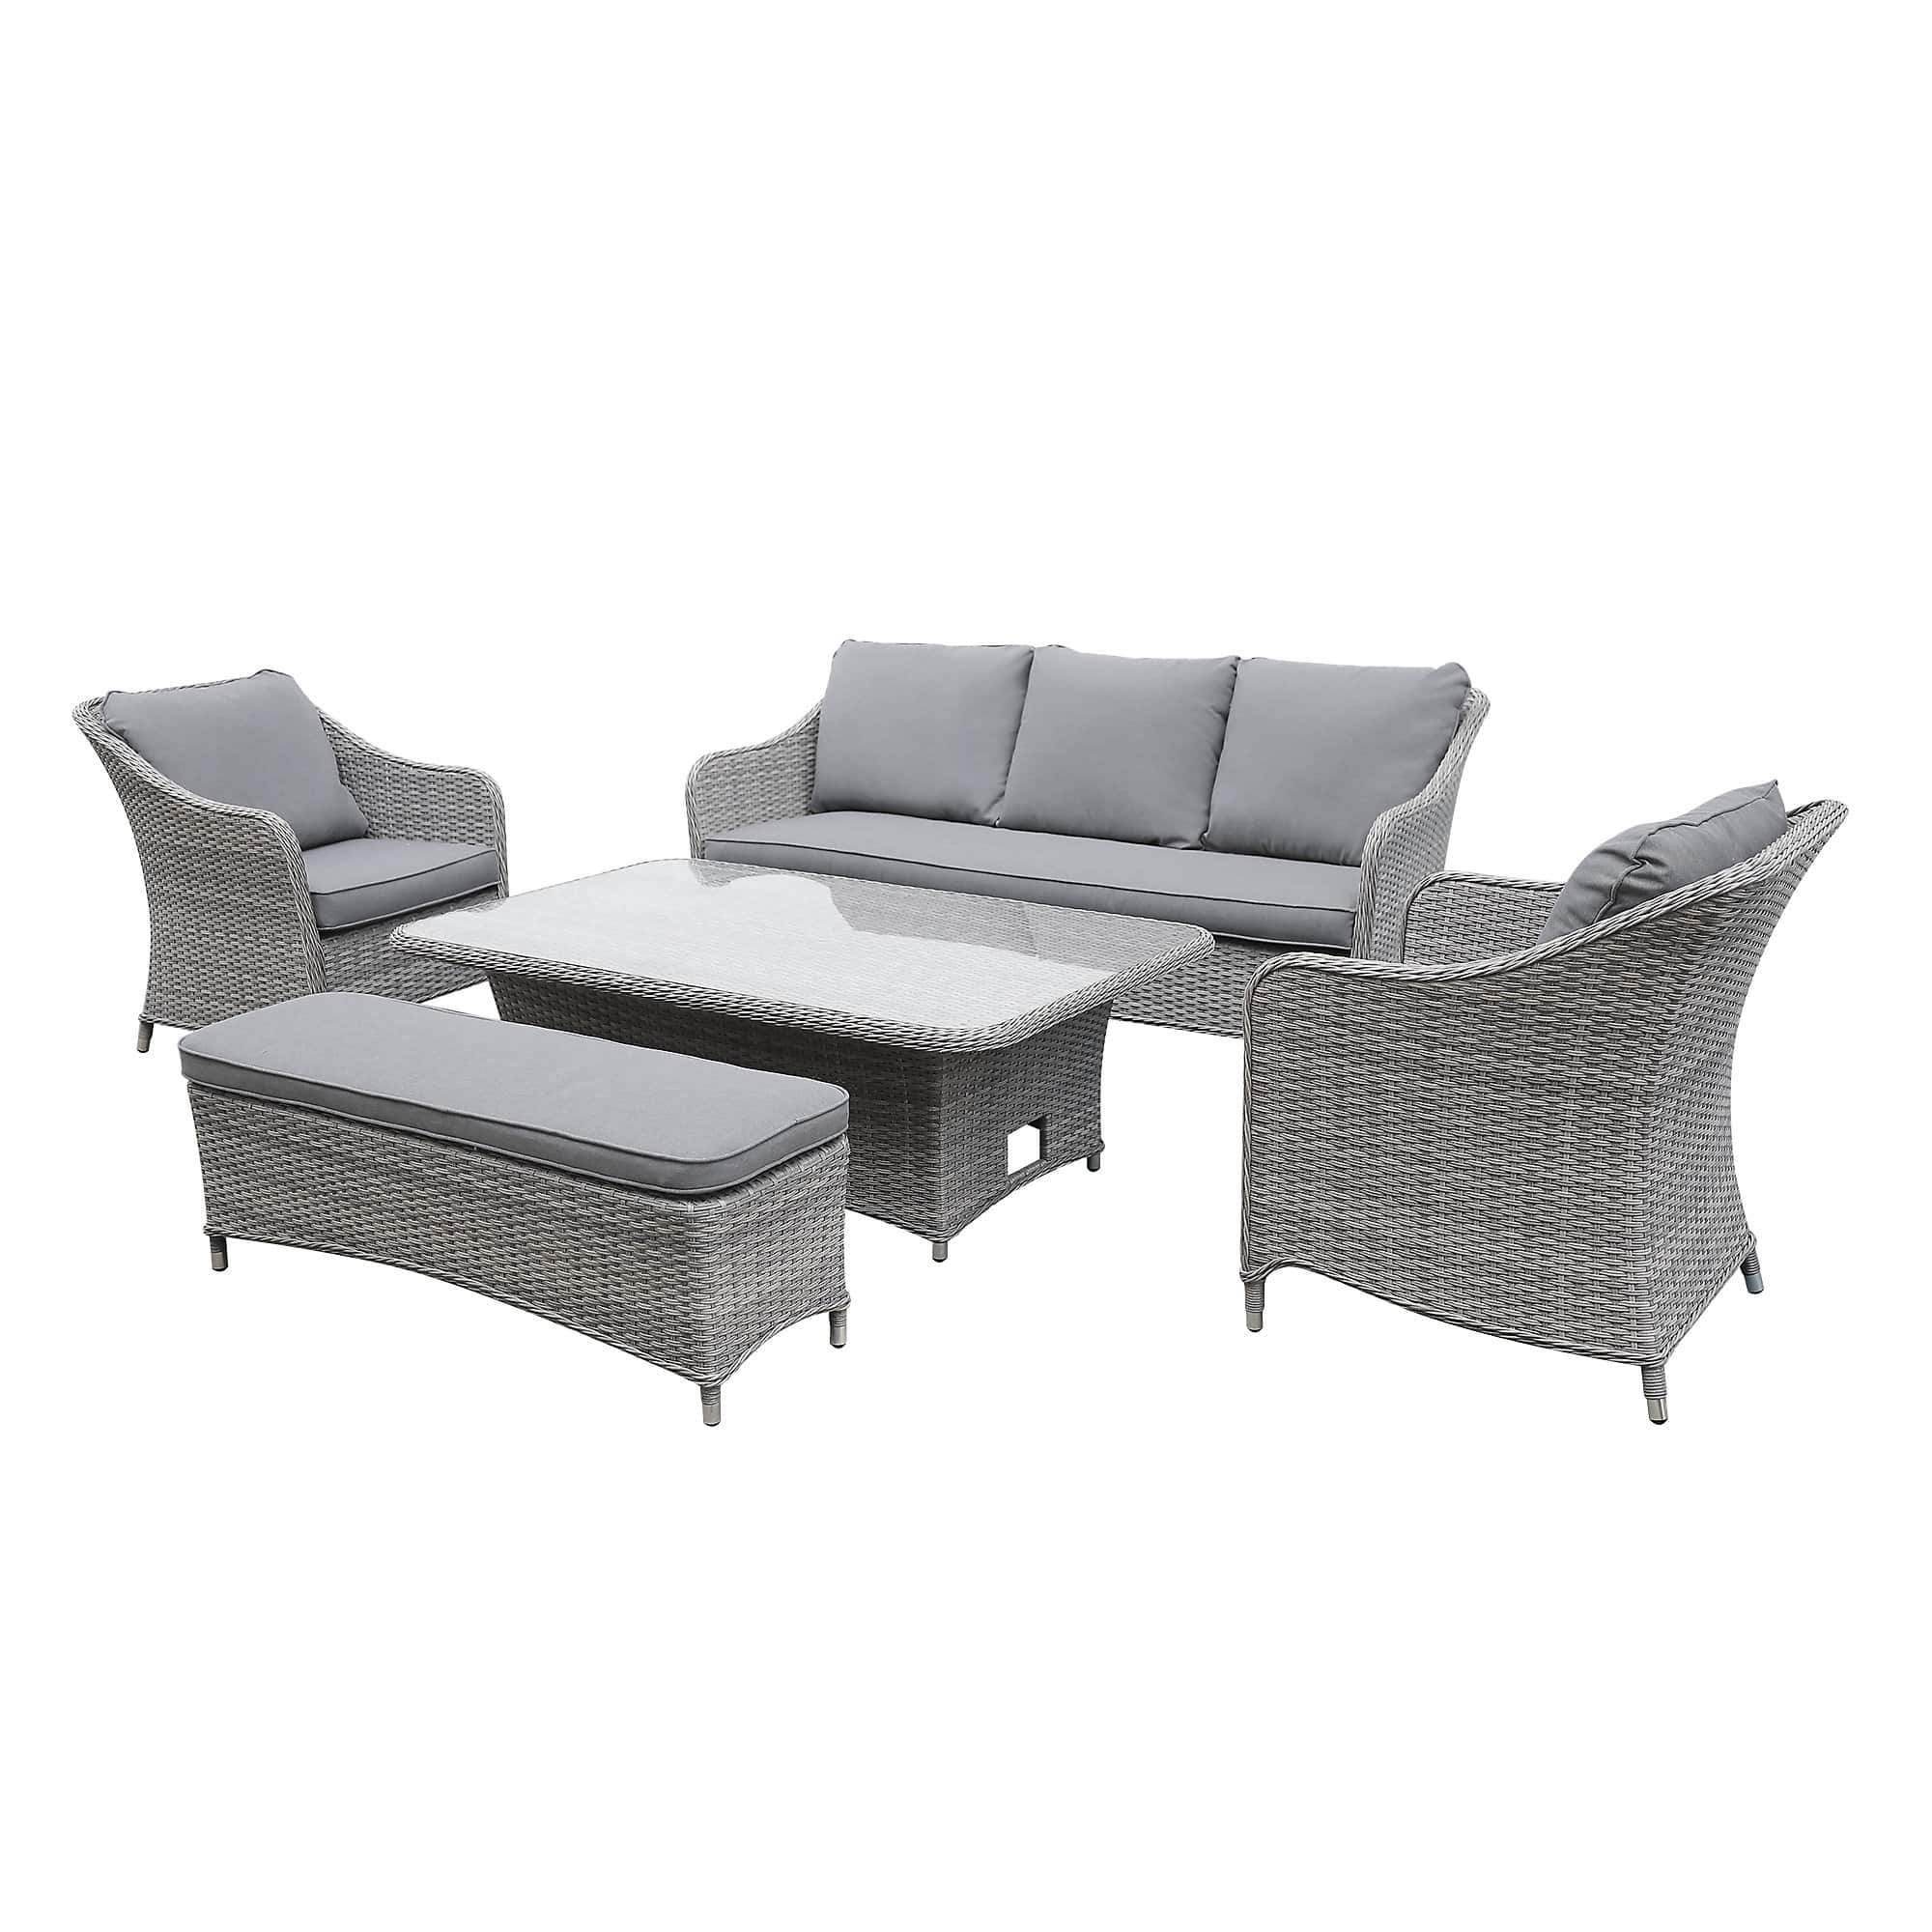 GoodHome Hamilton Steeple grey Rattan effect 7 Seater Garden furniture set - Table not included 2428